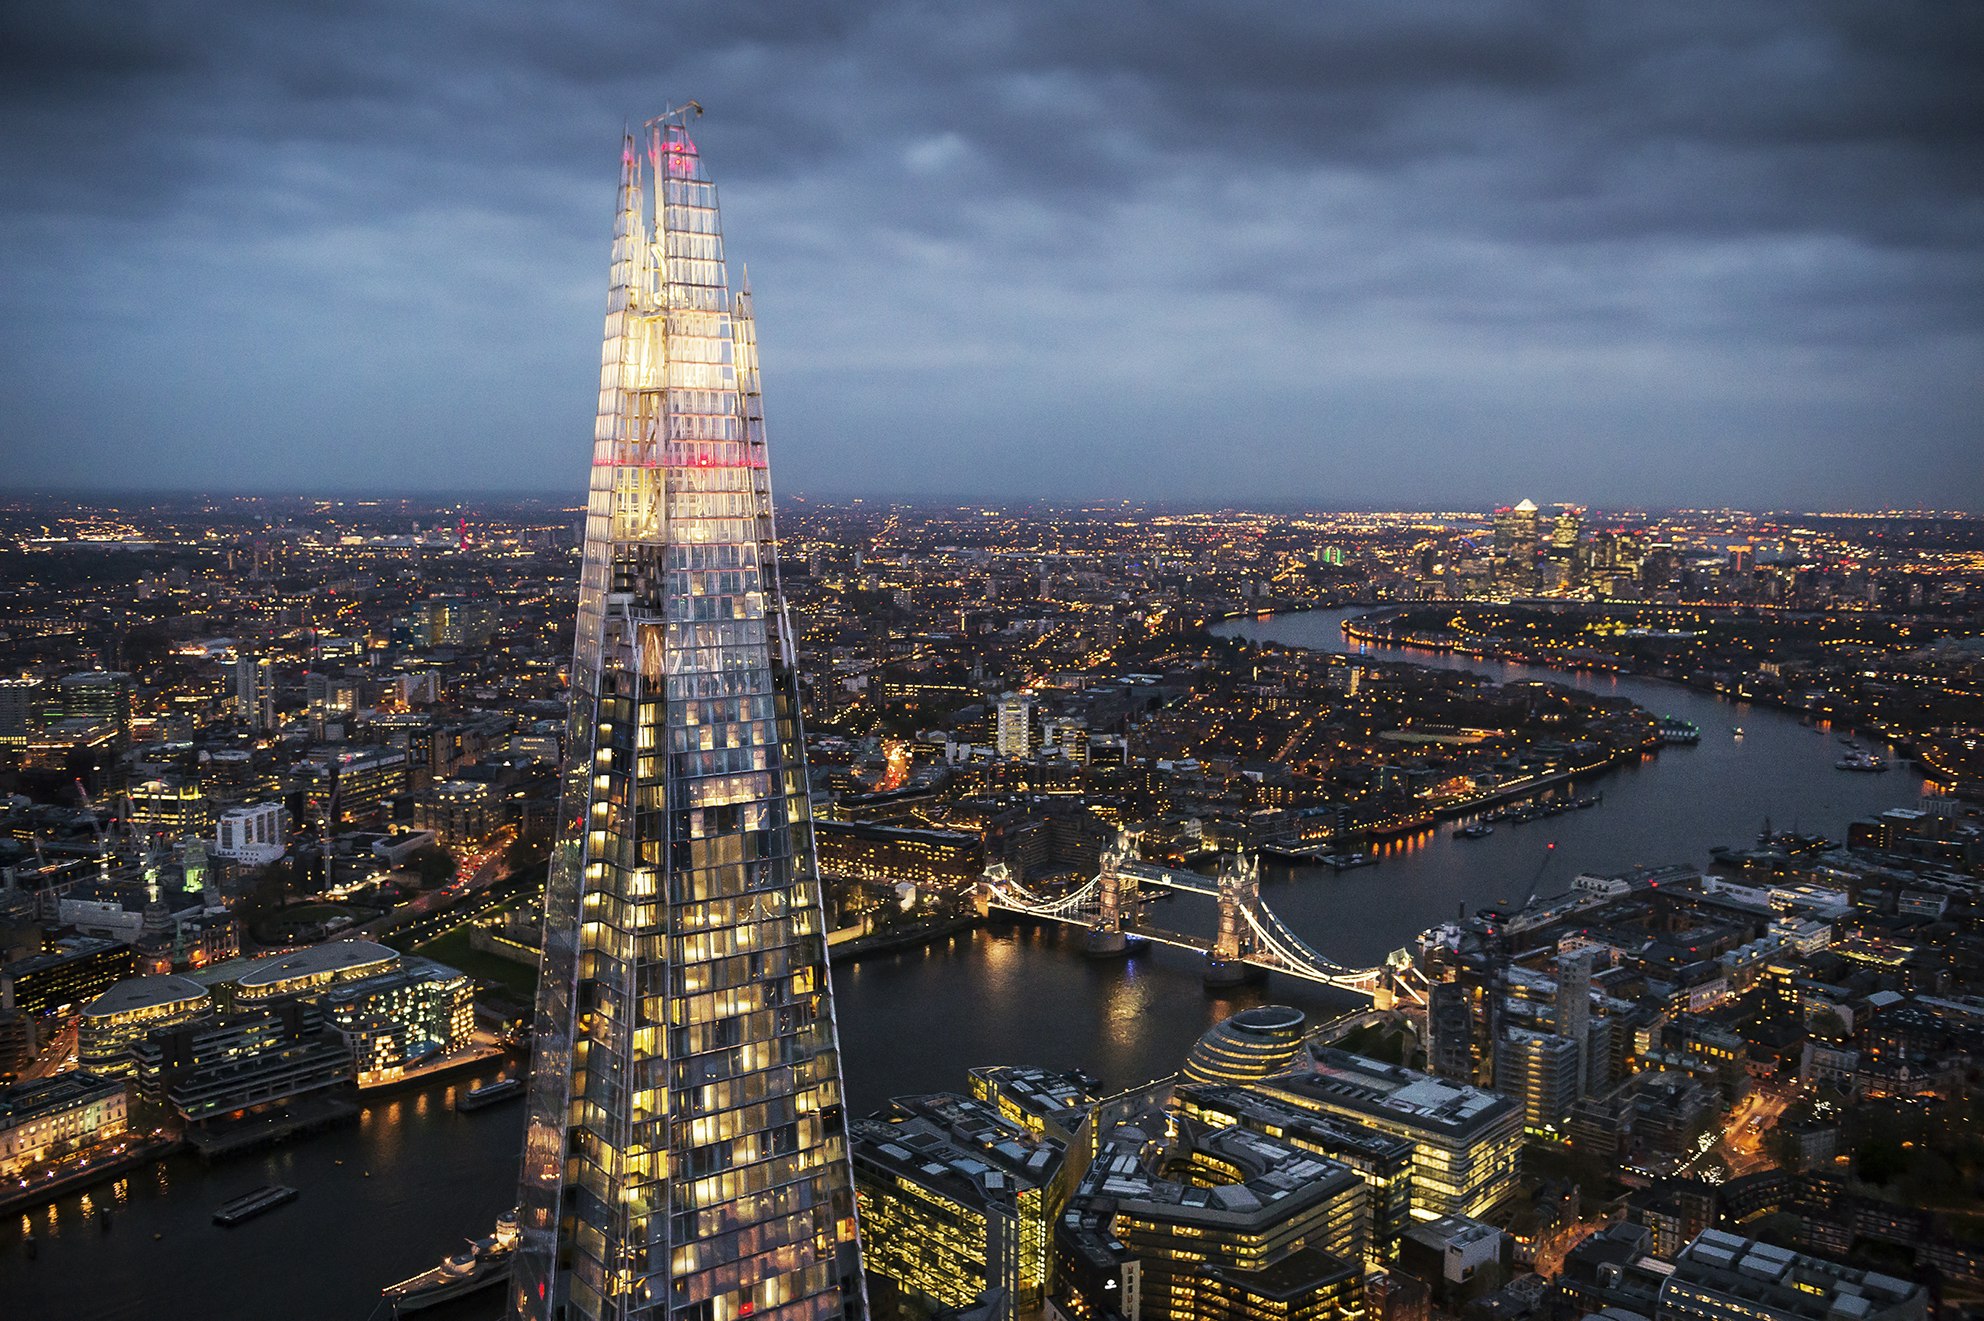 Marriage Proposal Venues in London - The View From The Shard